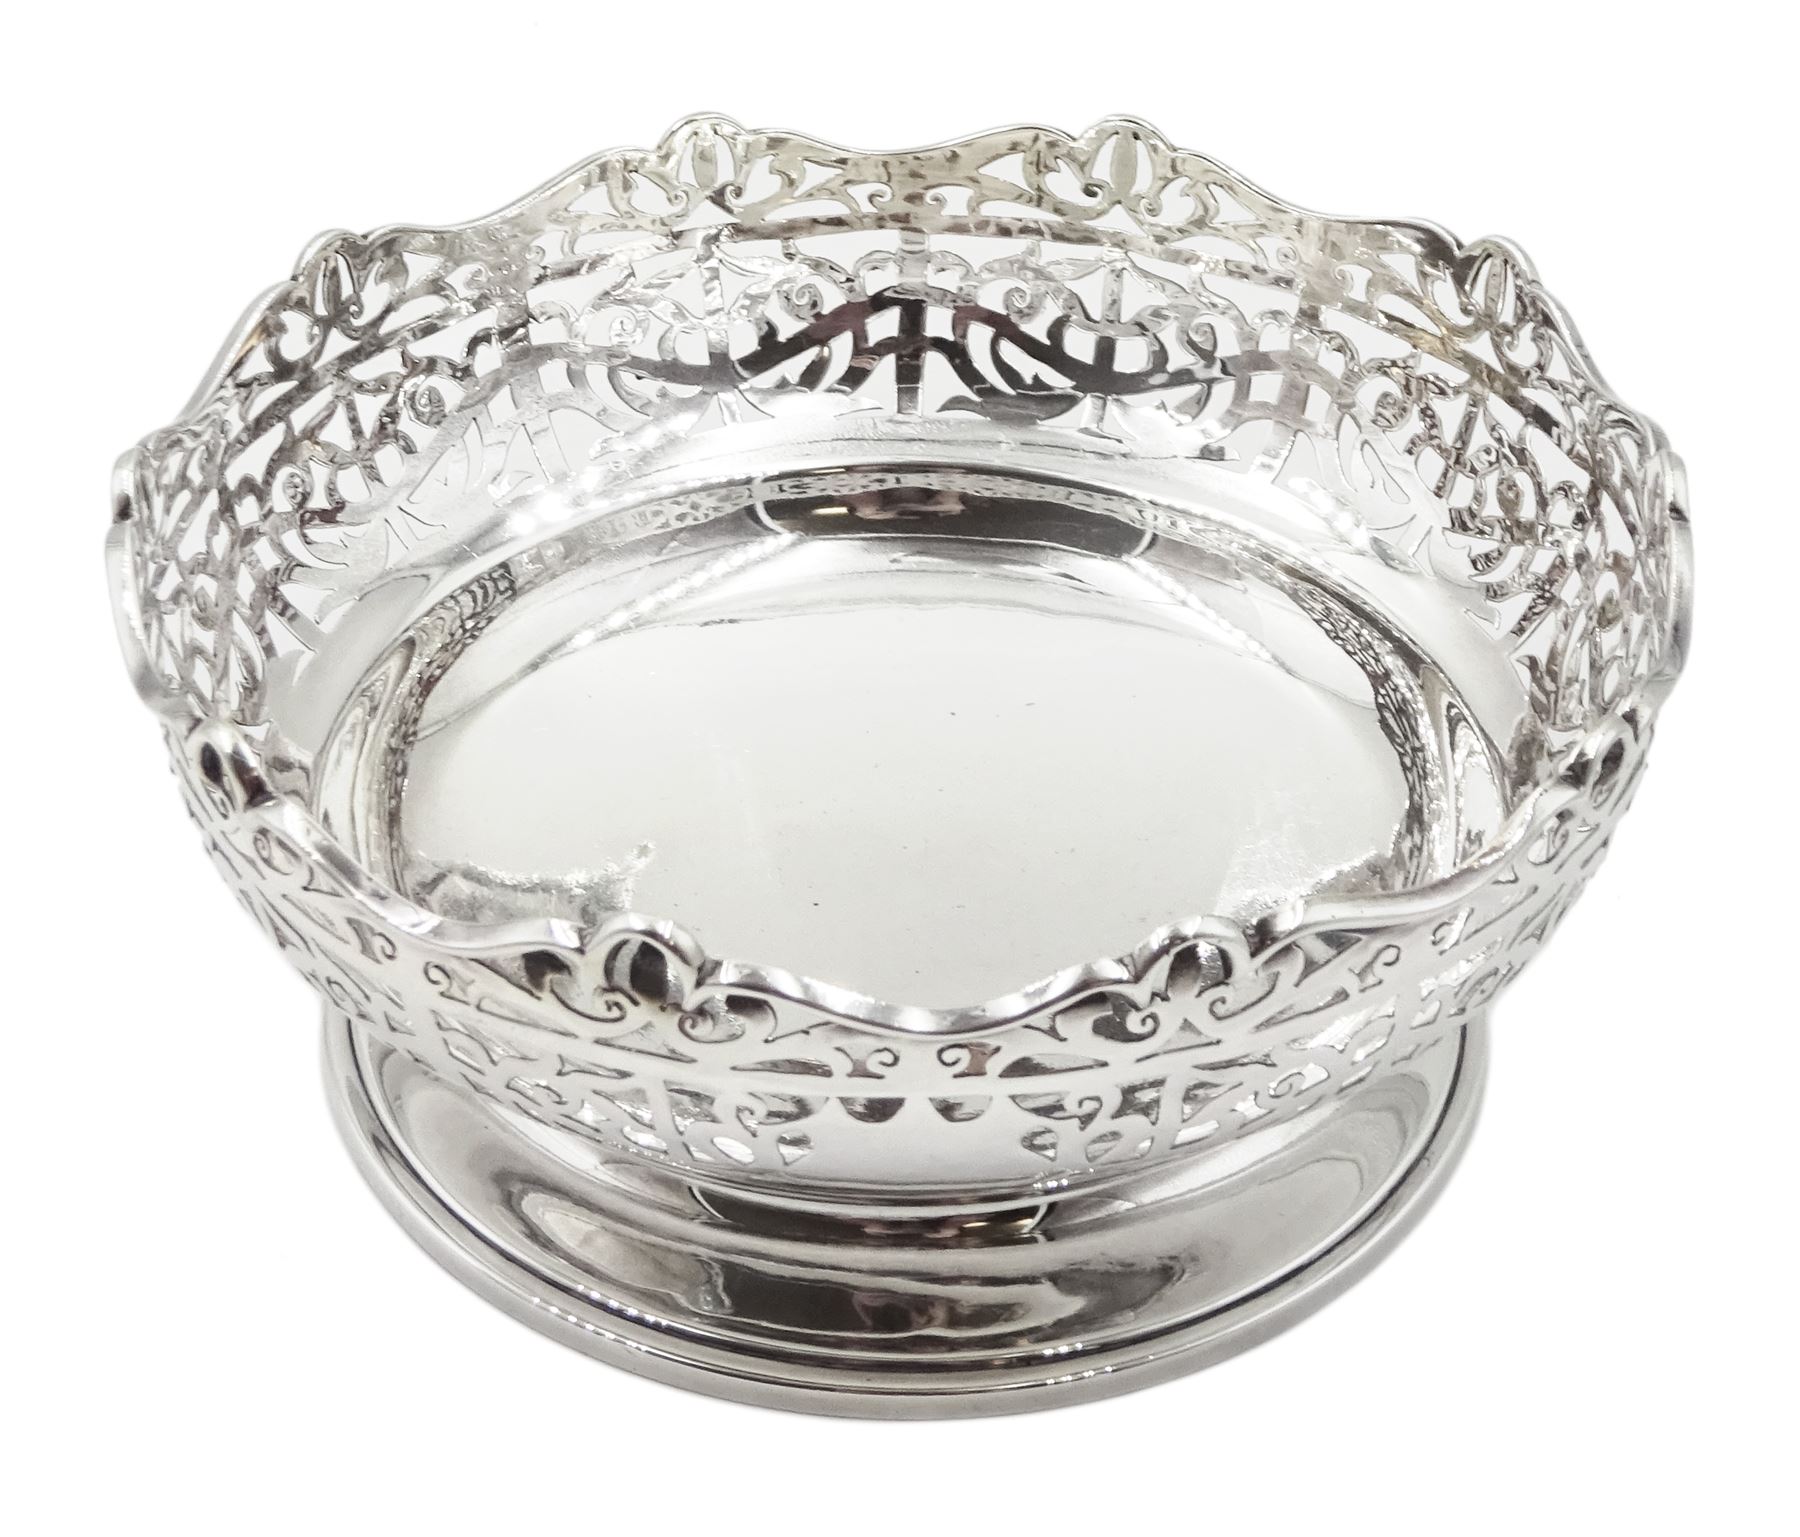 Edwardian silver raised bowl with pierced decoration by William Aitken - Image 2 of 3